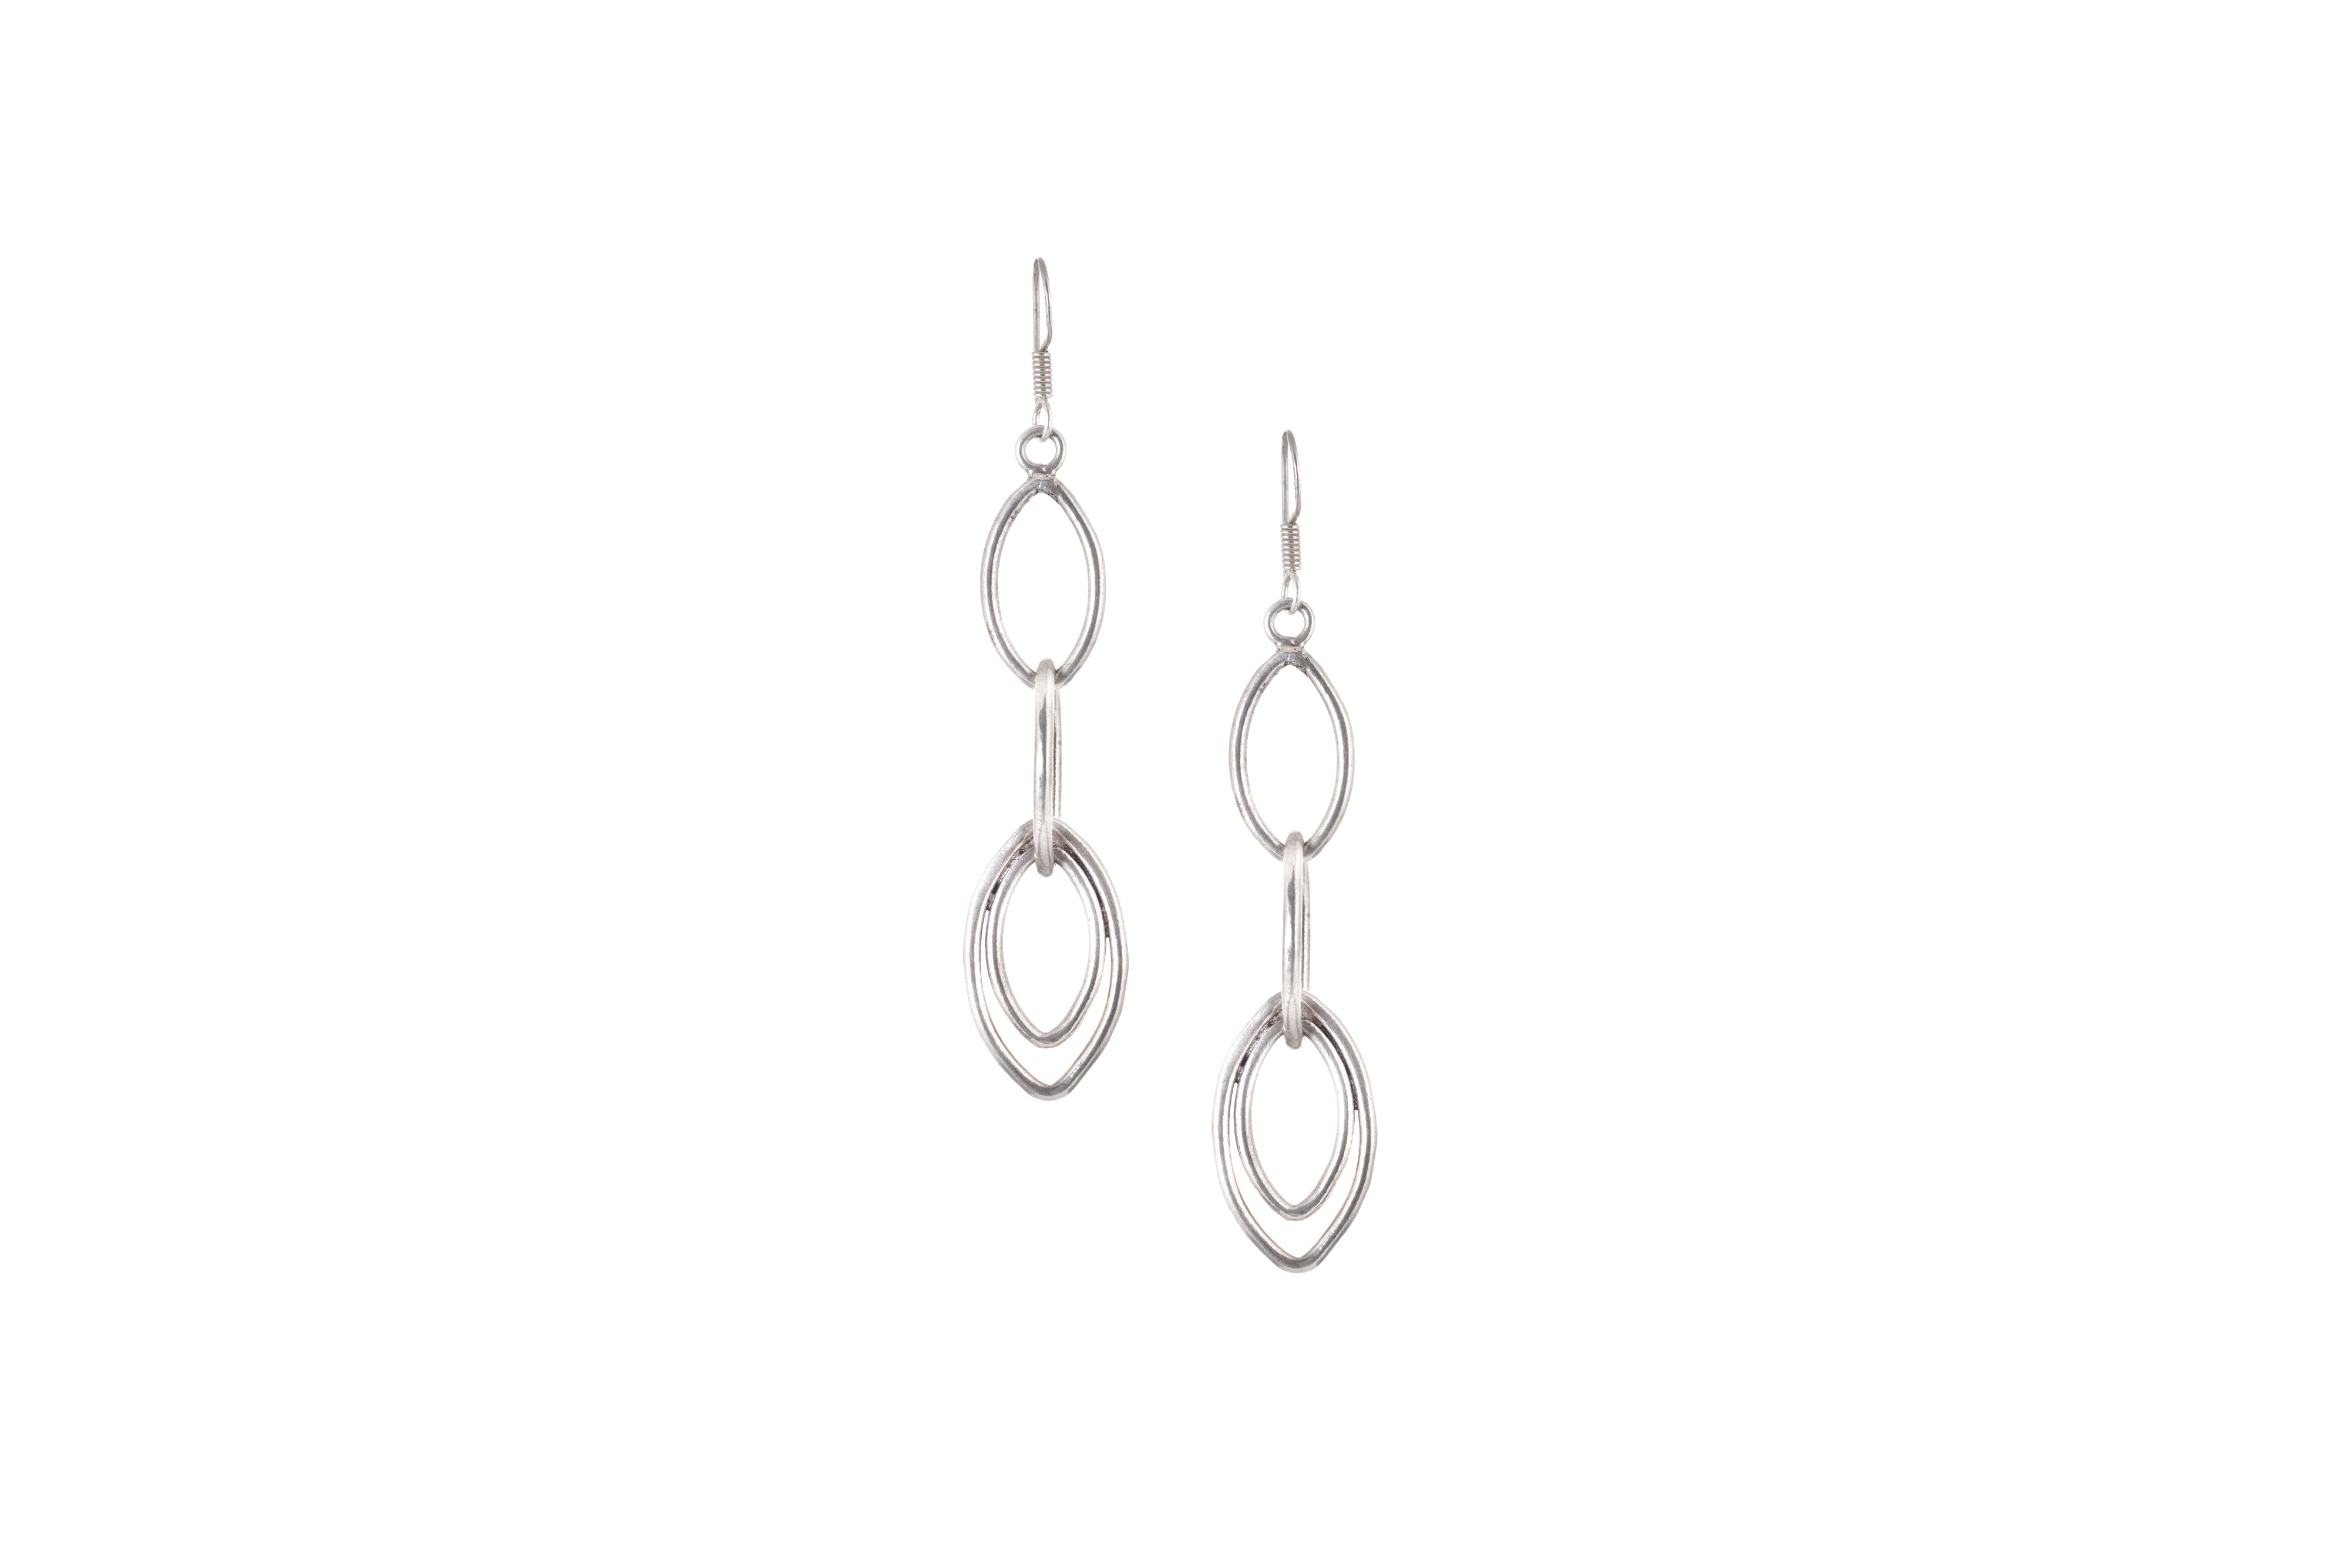 Silver Earring | Lightweight, versatile and modern, everyday accessory